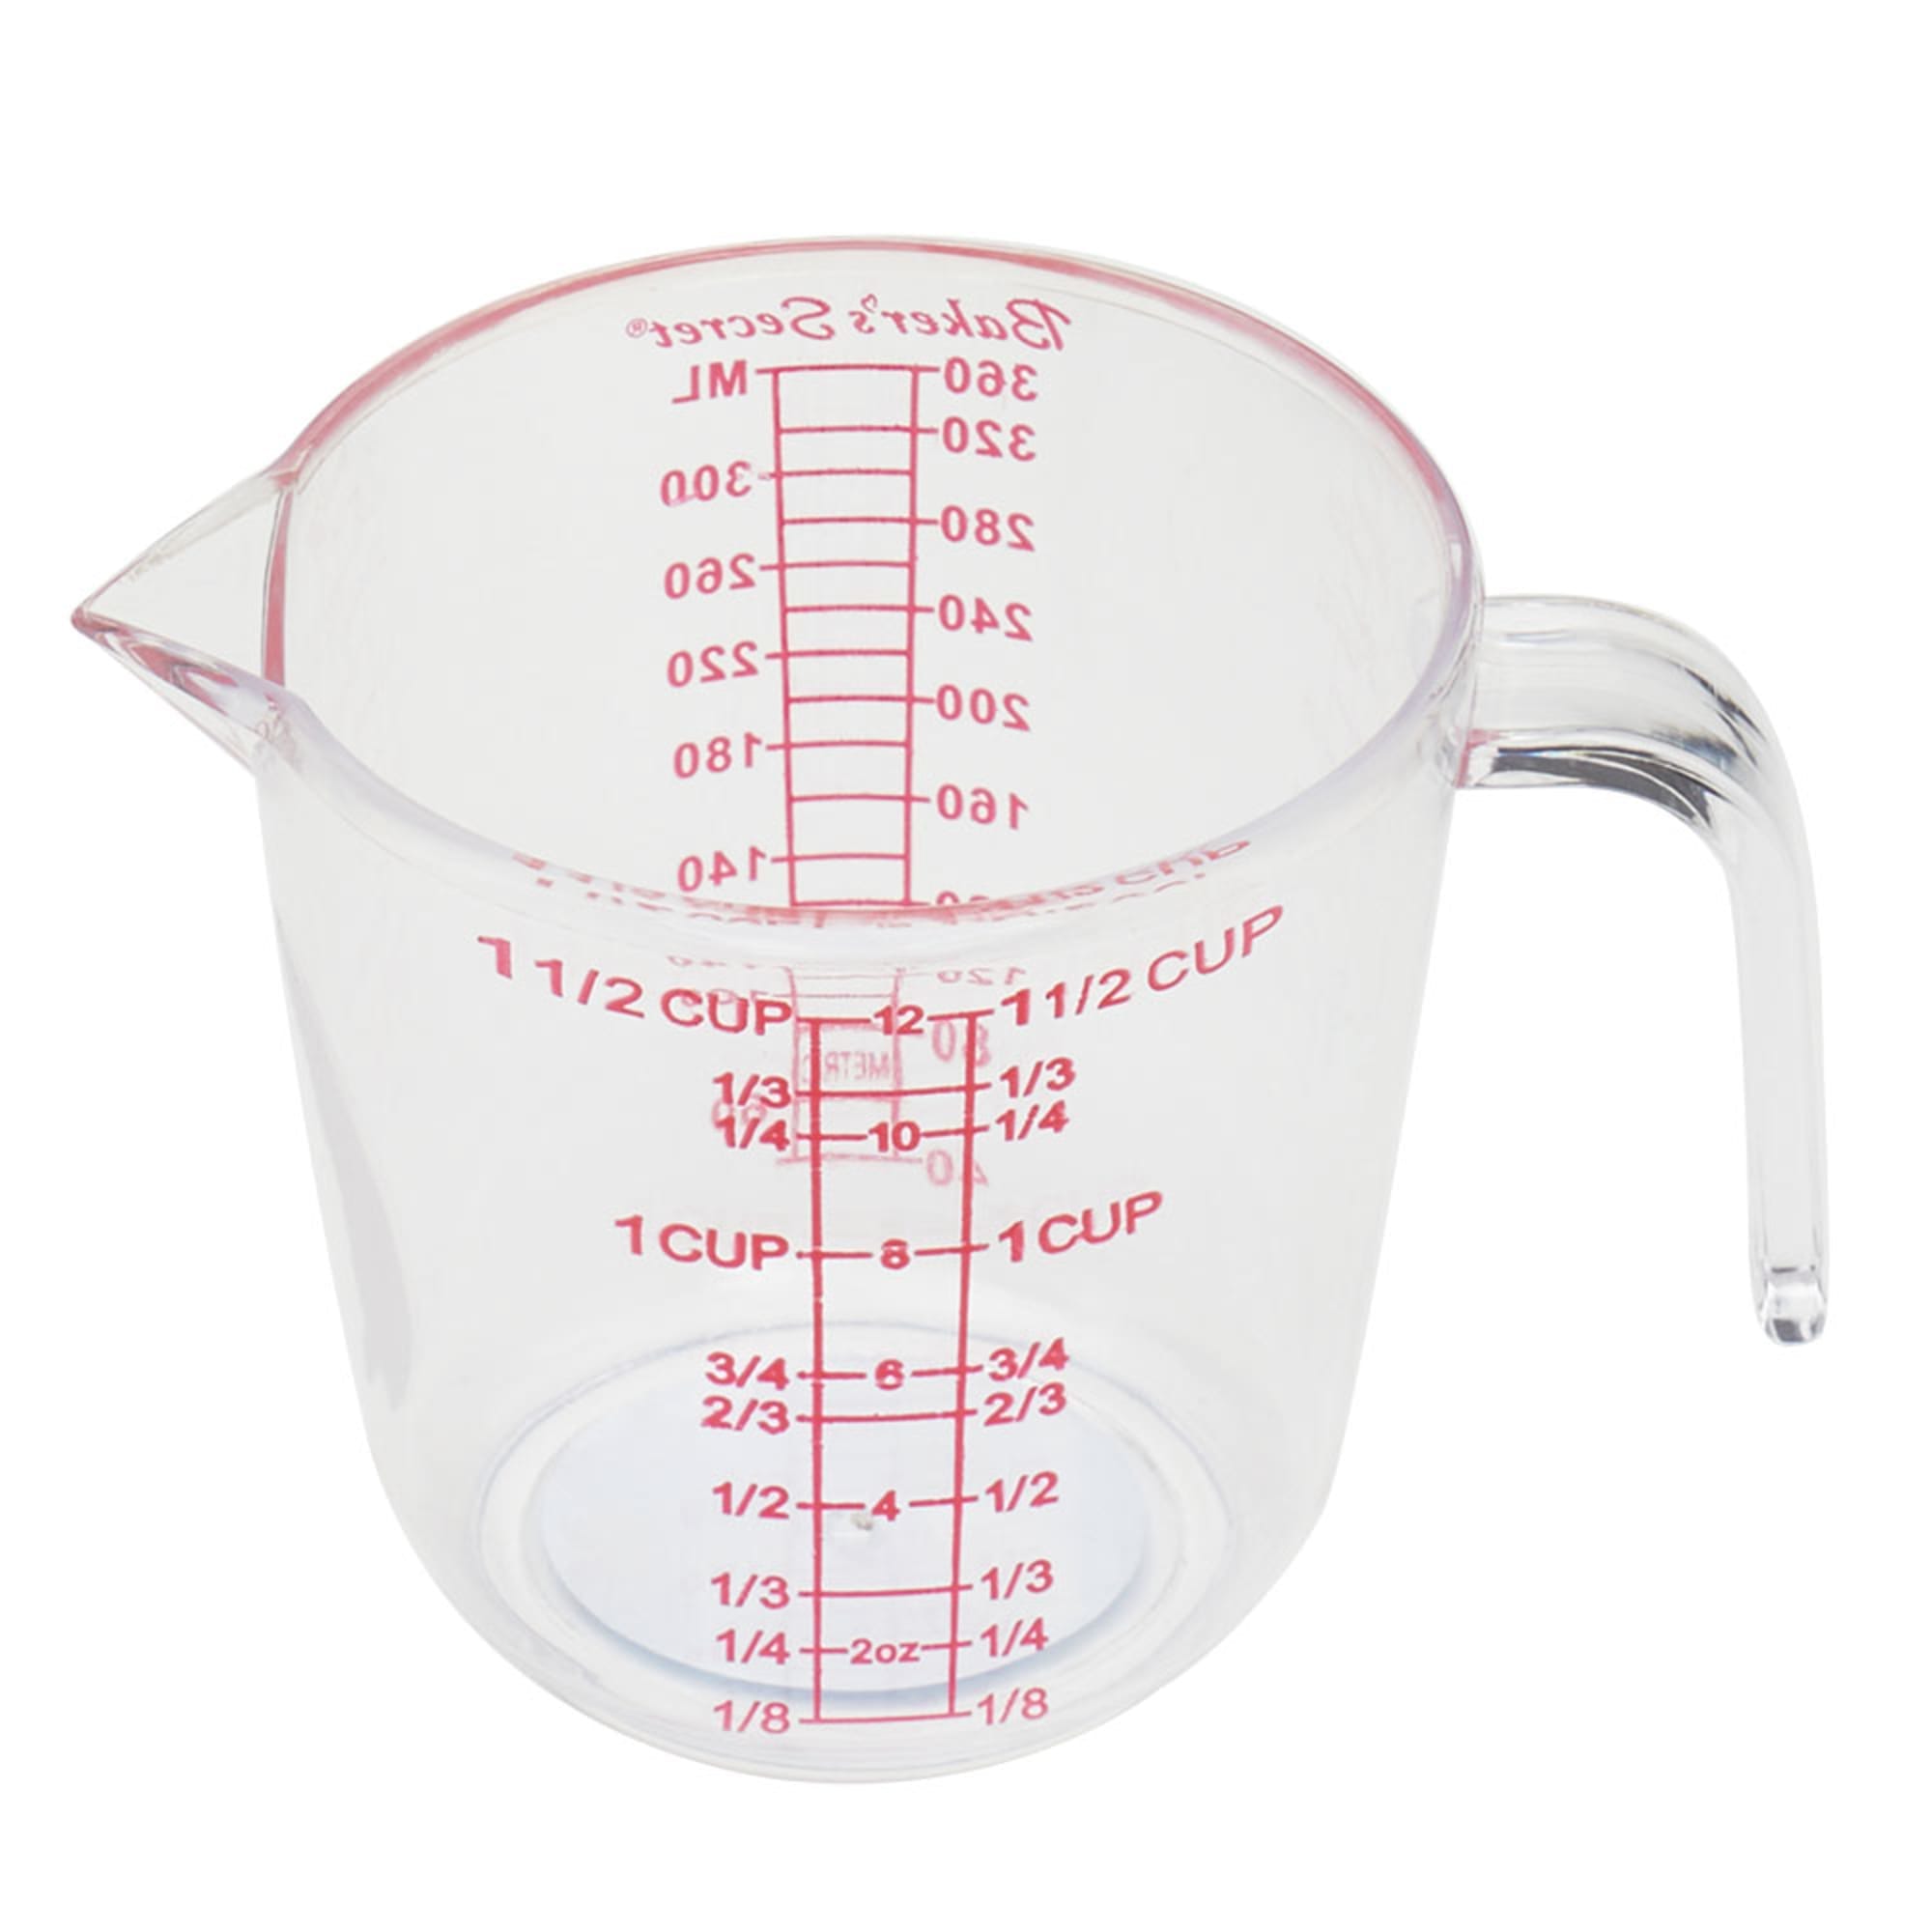 Arrow Plastic Measuring Cups for Liquids, 1.5 Cups - With Cool